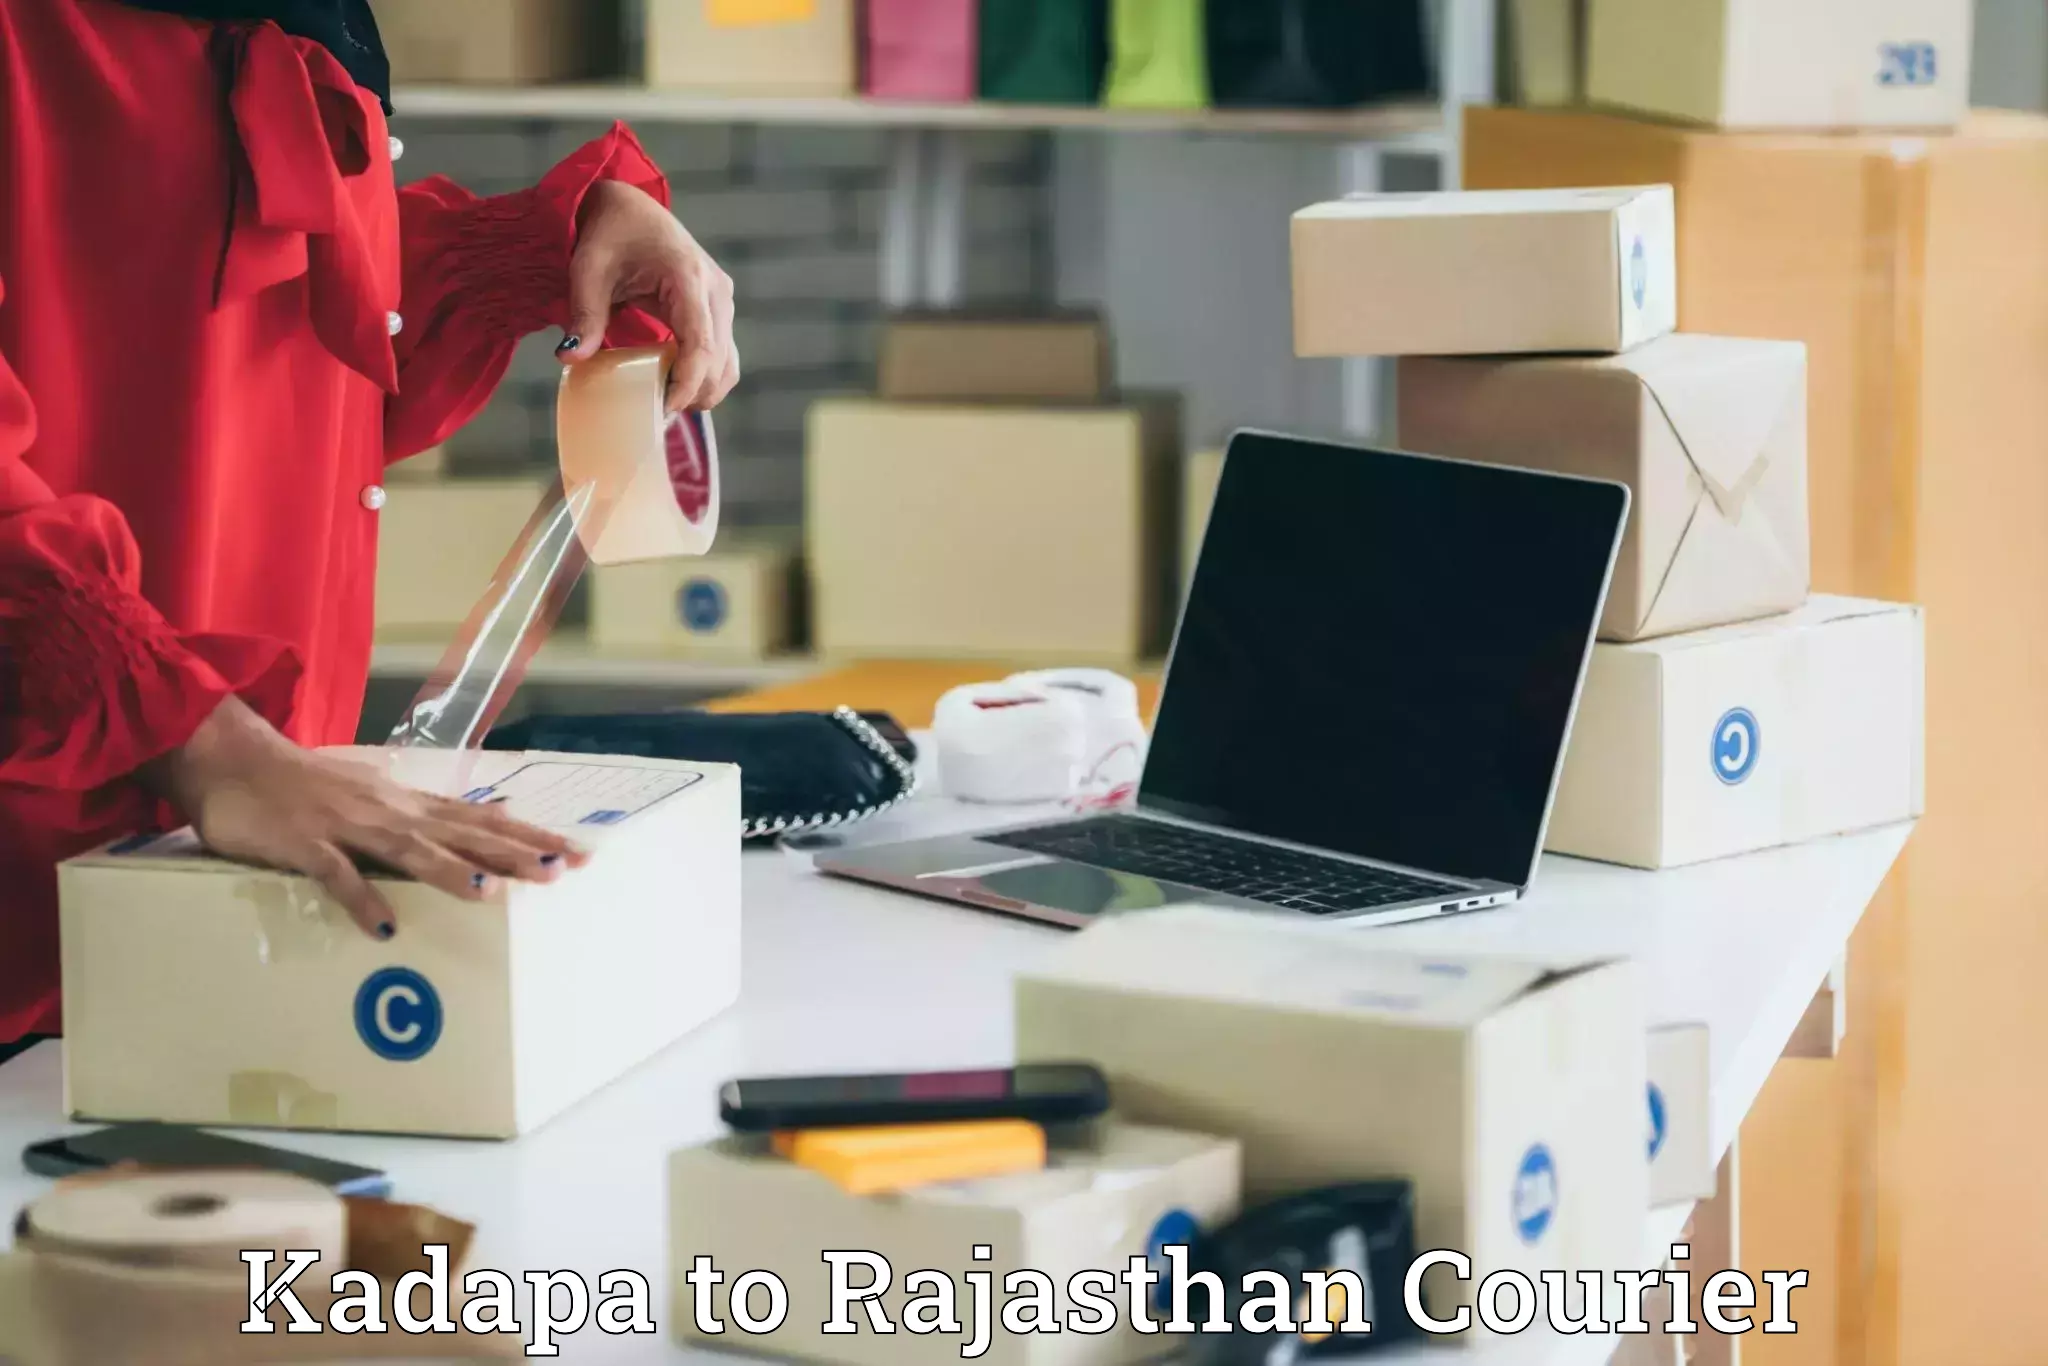 State-of-the-art courier technology Kadapa to Dholpur